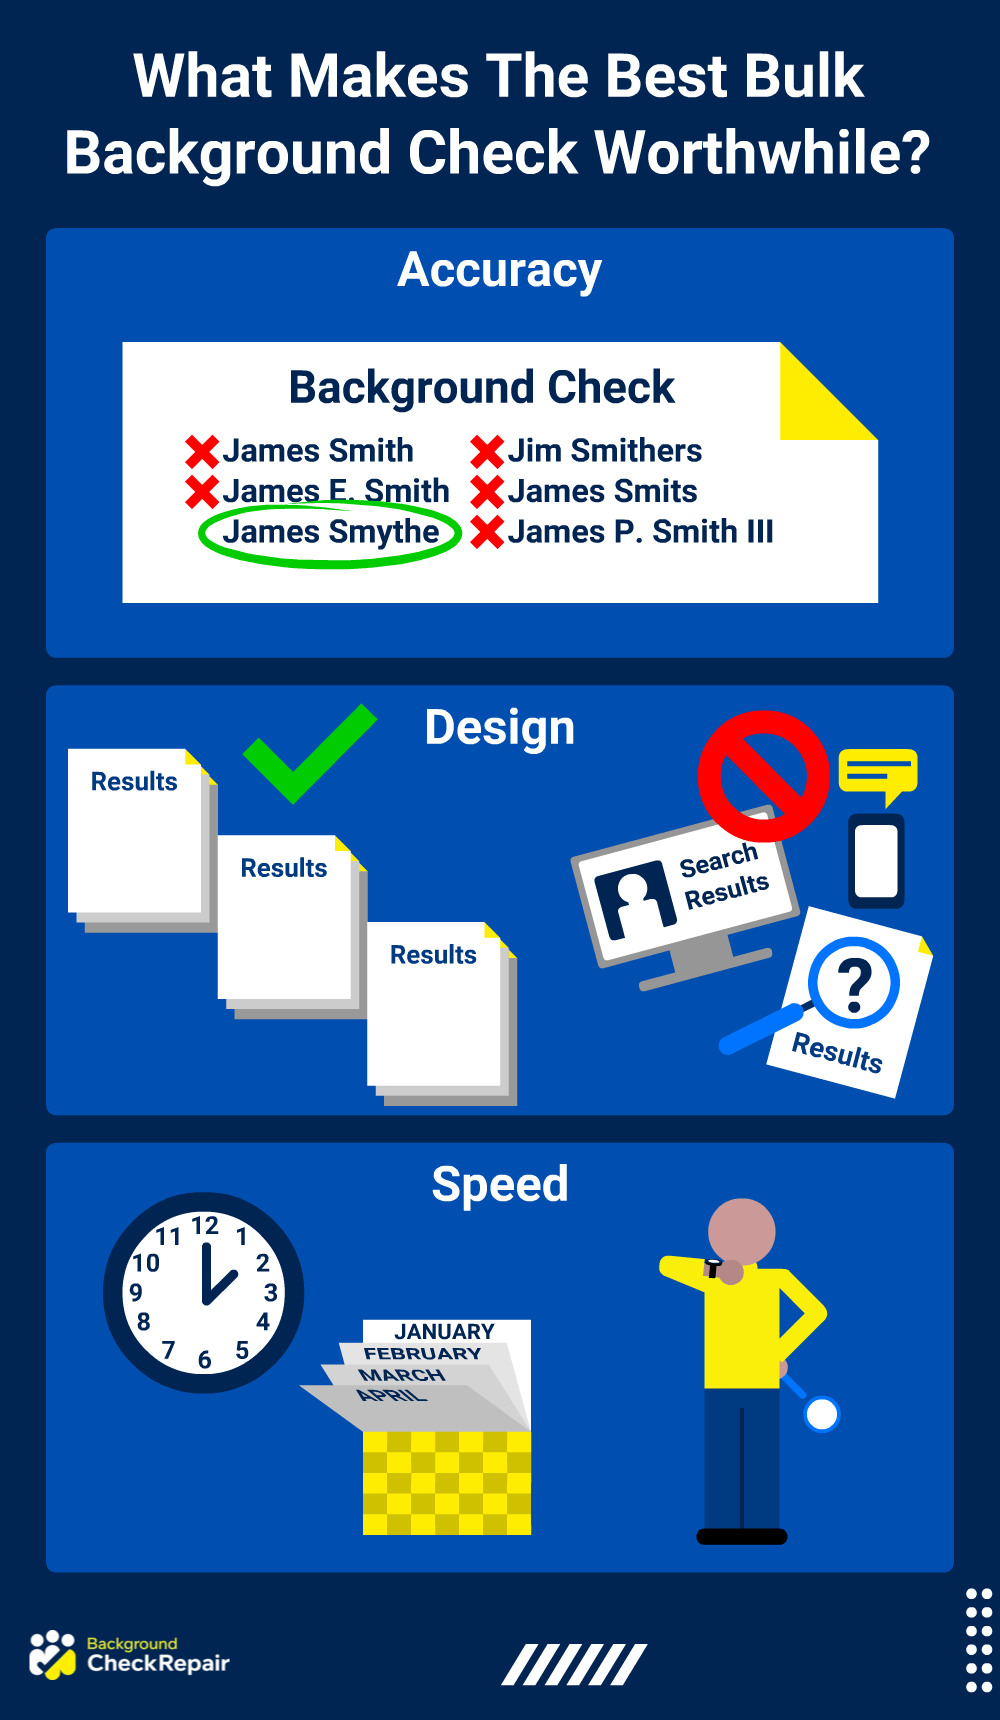 Graphic showing what makes the best bulk background check worth it, including bulk tenant background checks and roughly how many employers conduct background checks and background checks for thousands of workers by focusing on accuracy, speed and design. 